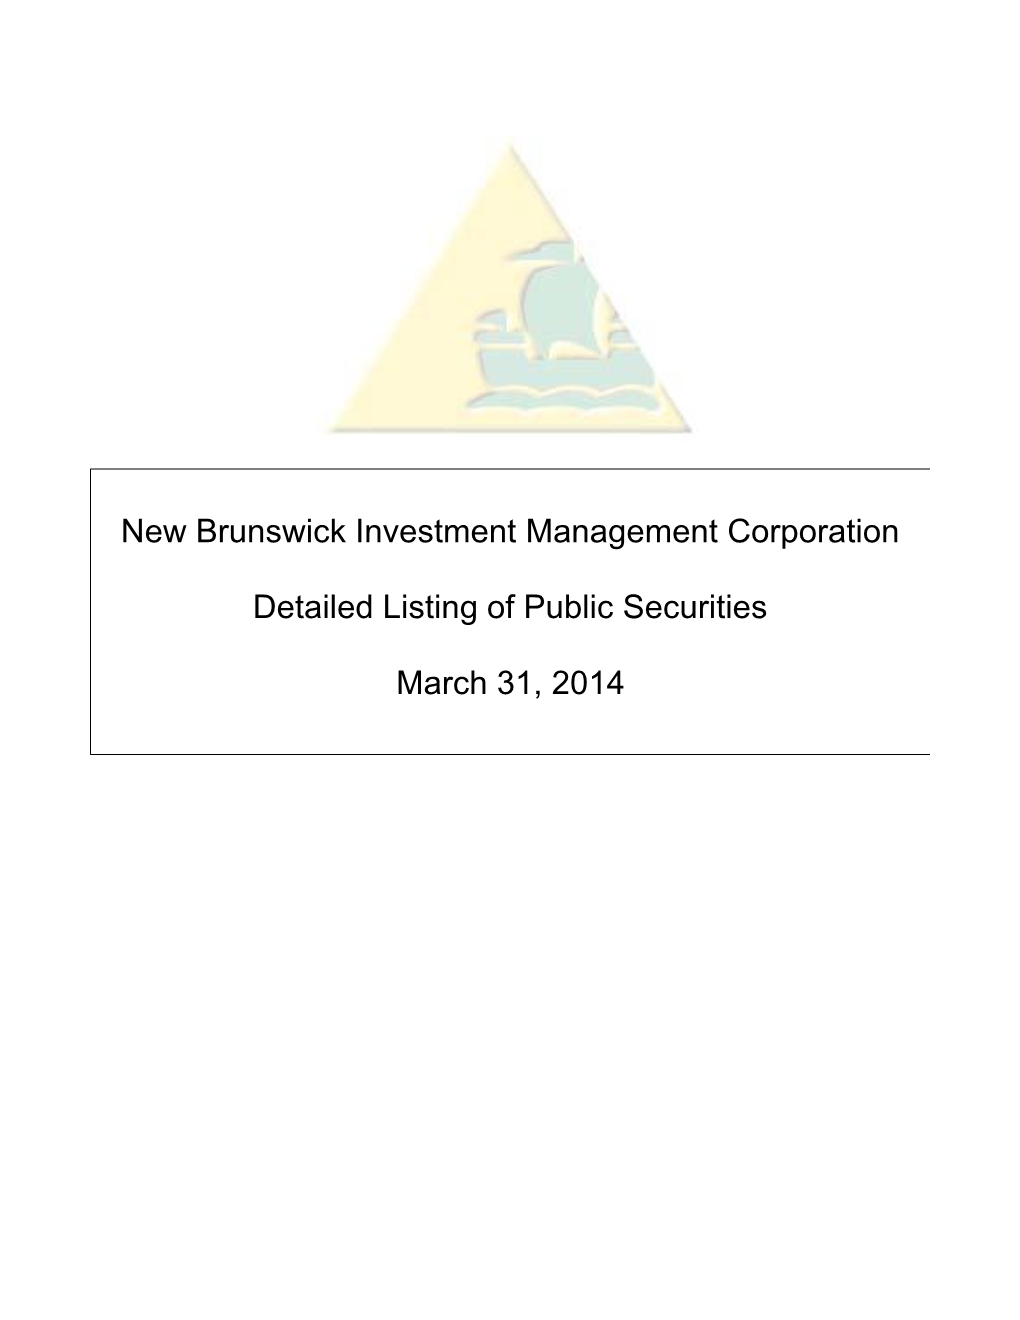 NEW BRUNSWICK INVESTMENT MANAGEMENT CORPORATION Detailed Holdings at March 31, 2014